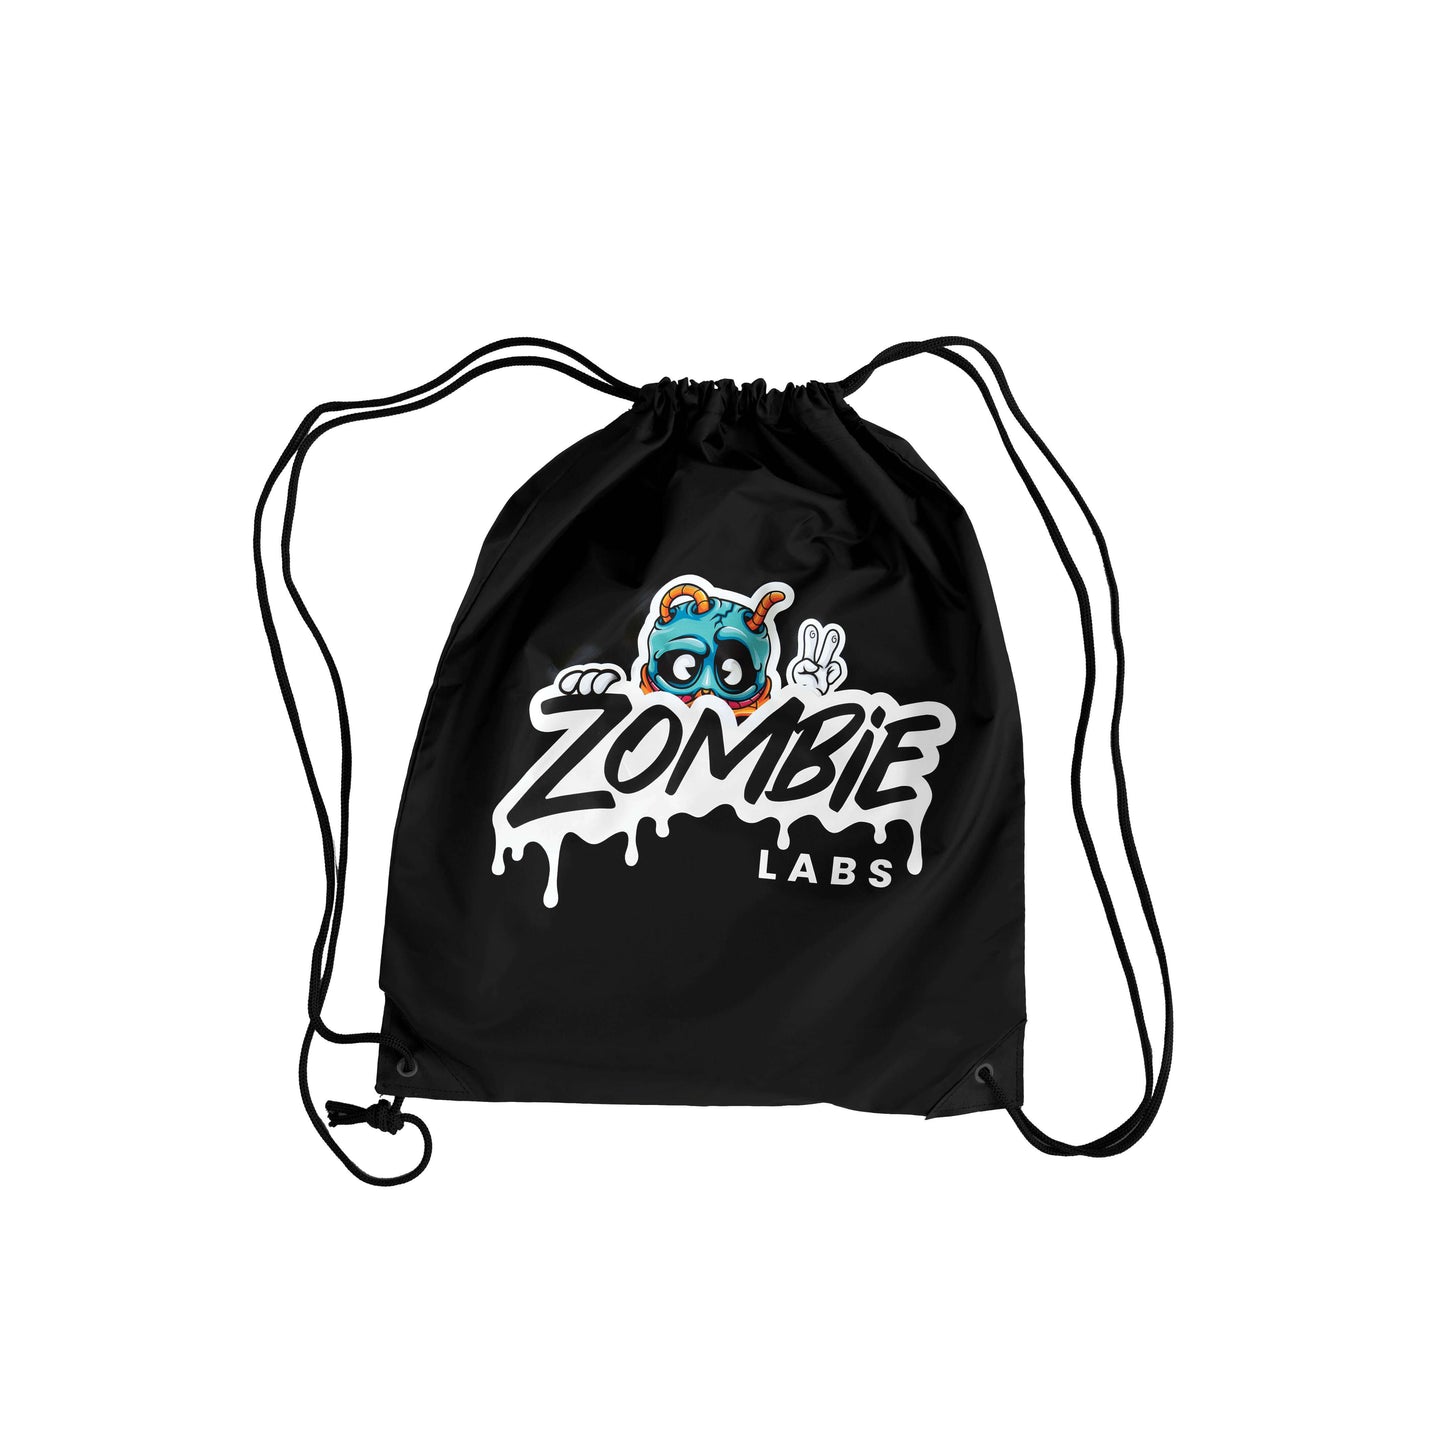 Black drawstring gym bag with bold Zombie Labs logo on the front, ideal for carrying workout essentials.